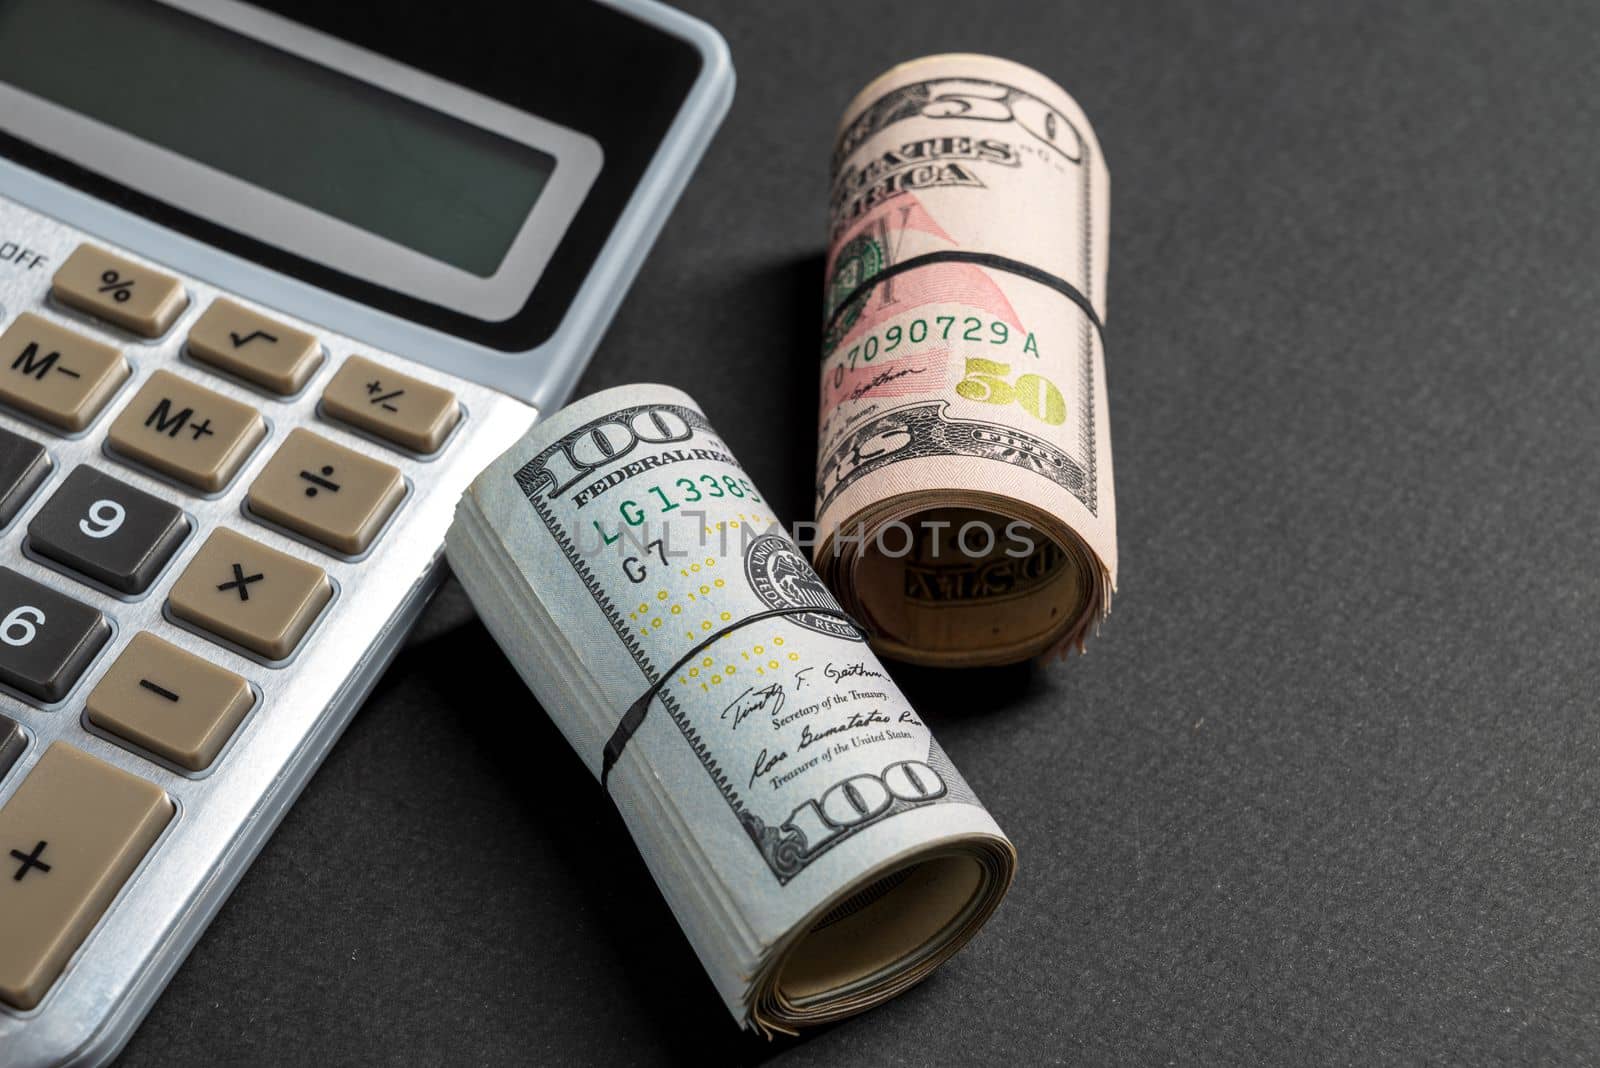 Rolls of 50 and 100 us dollar standing near calculator on dark background by Sonat